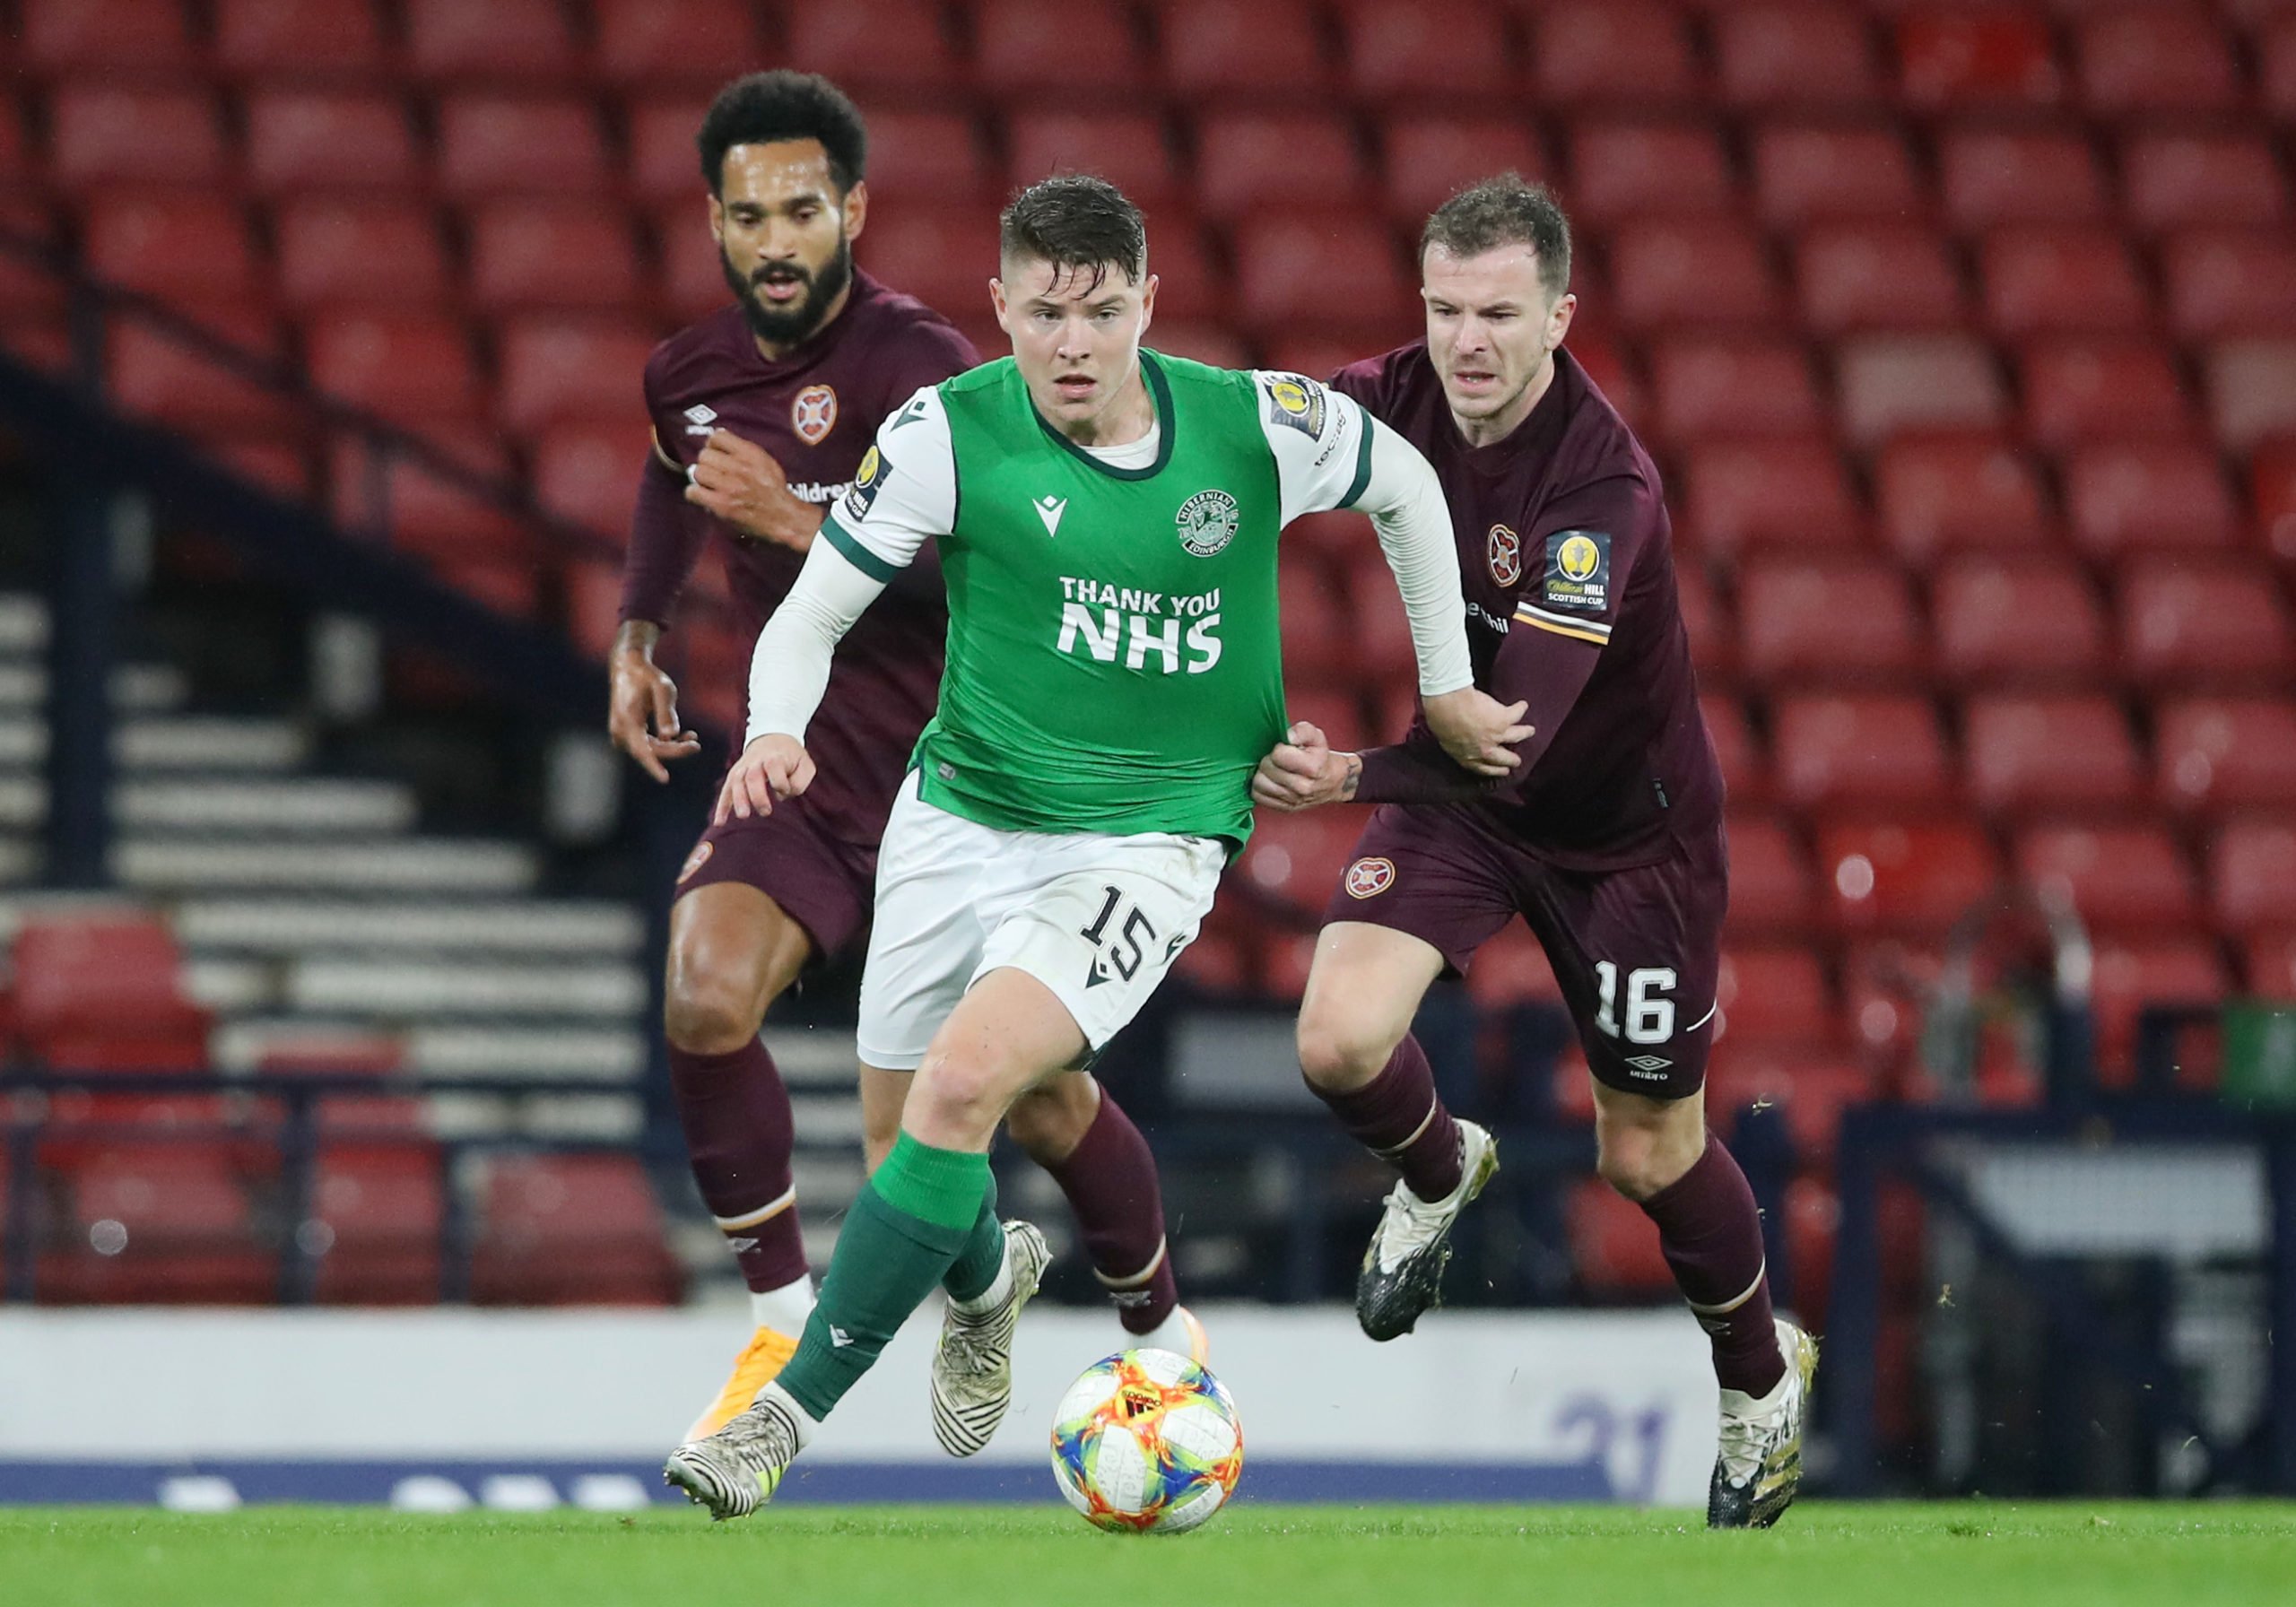 Celtic would be getting a proven goal-scorer in Kevin Nisbet